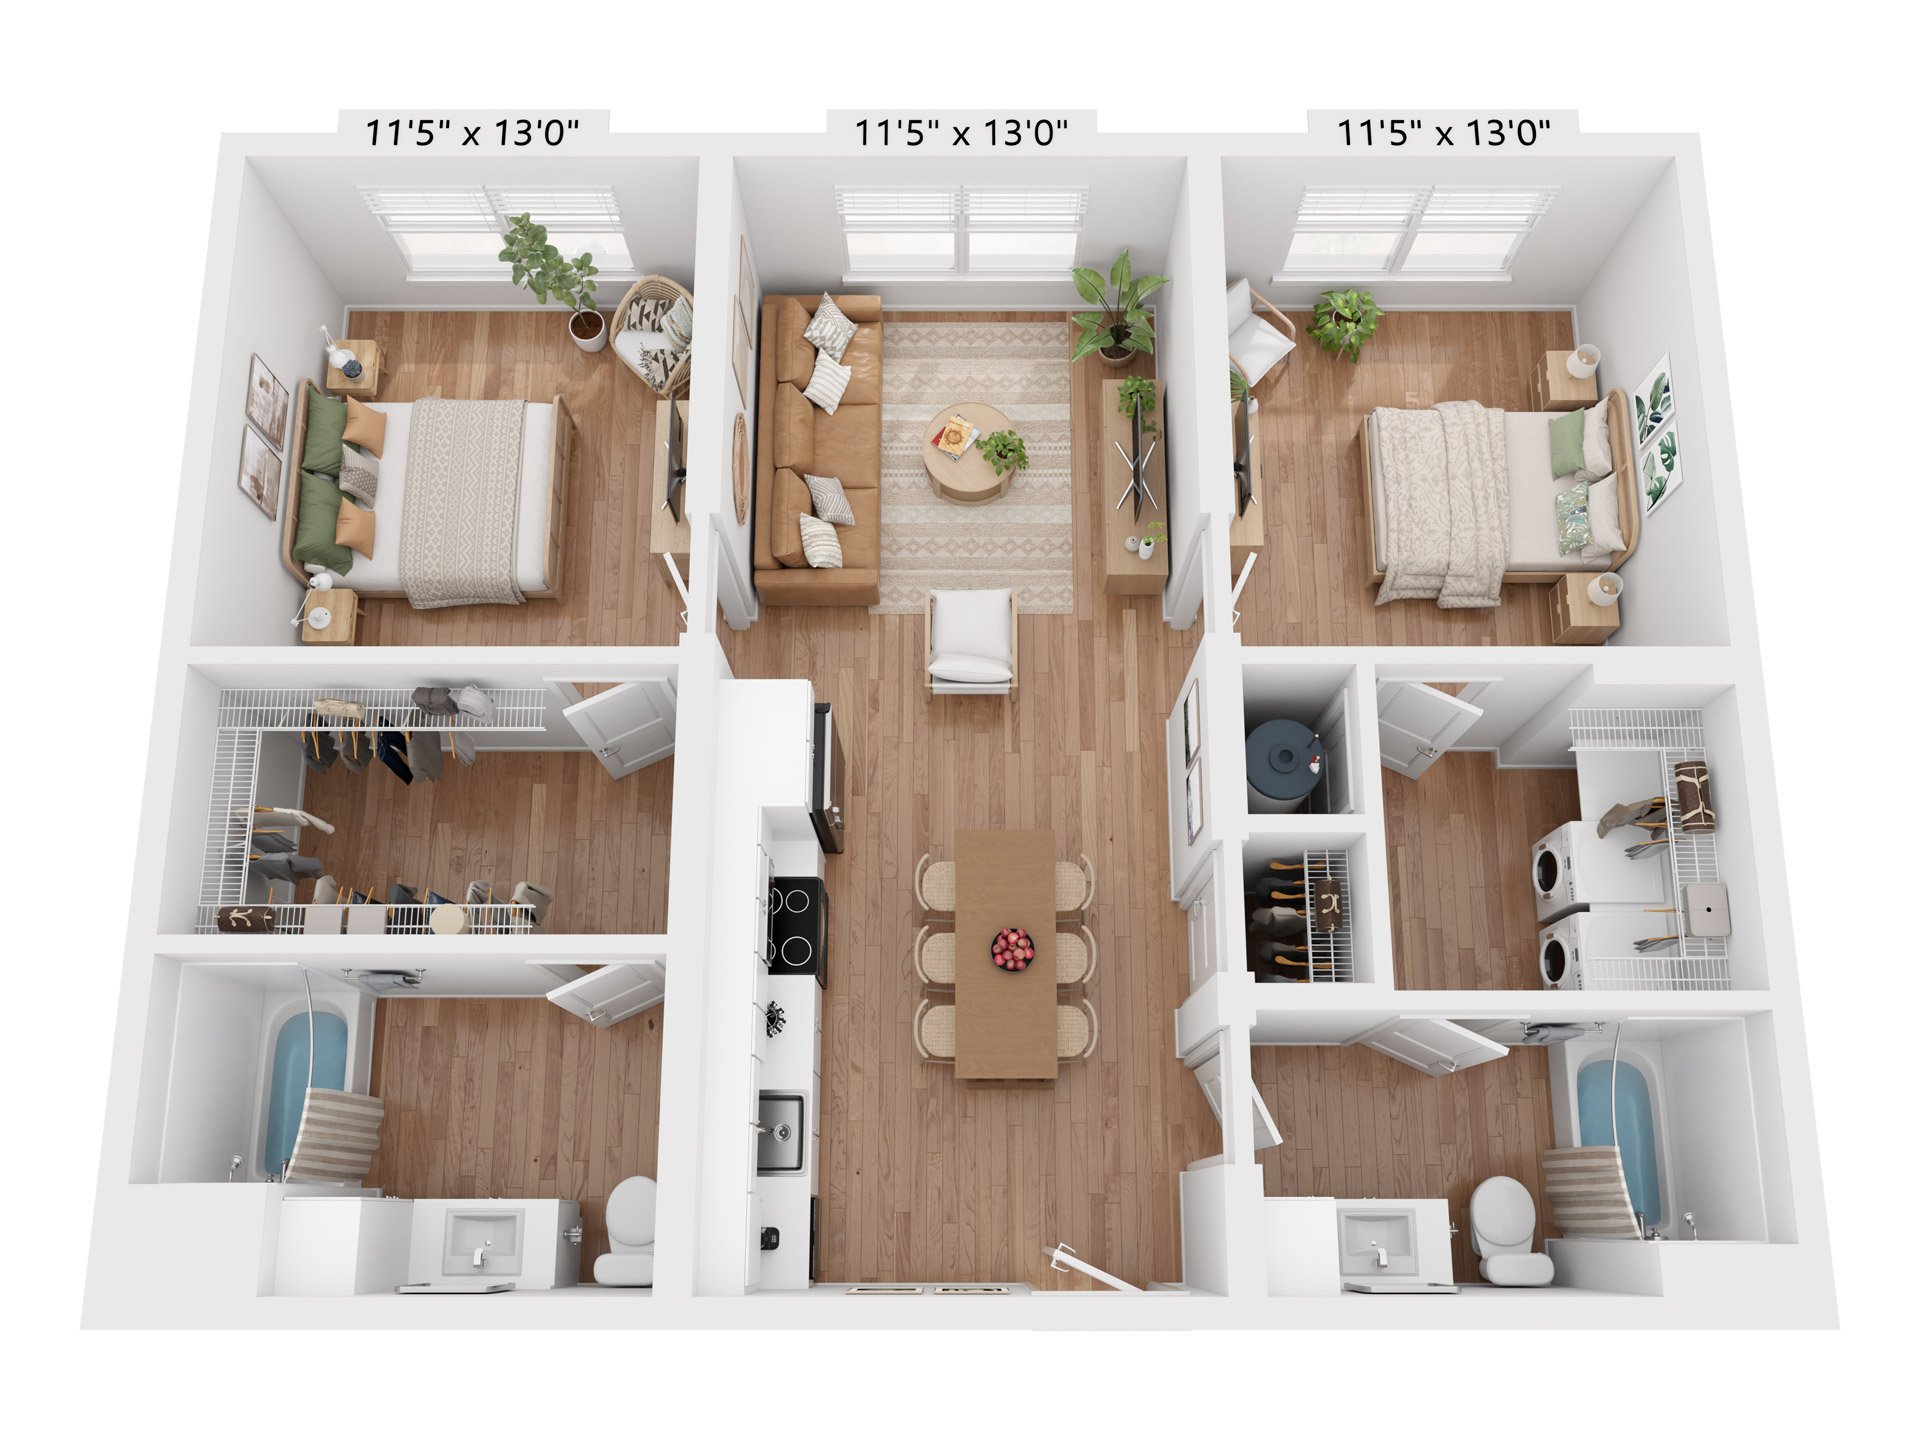 Floor plan map for a two bedroom apartment at Ltd. Findlay in Coraopolis, PA, featuring rooms with dimensions.